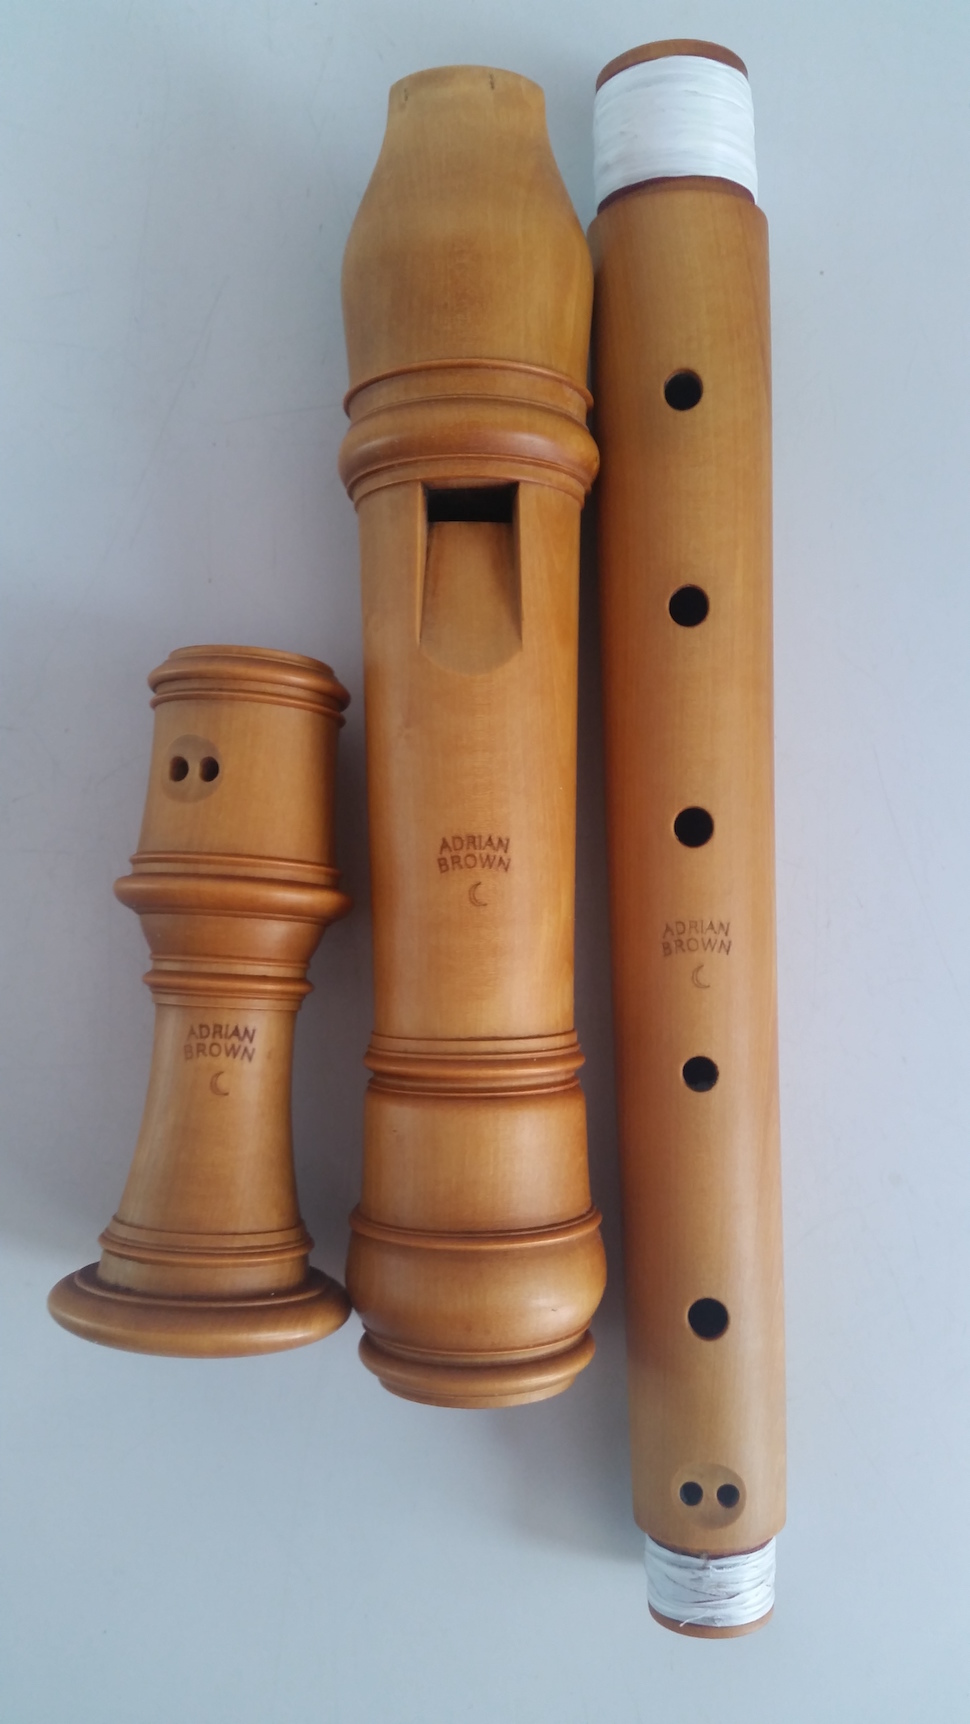 Alto-recorder-by-Adrian-brown-recorders-for-sale-com-00 \u2014 Recorders for sale